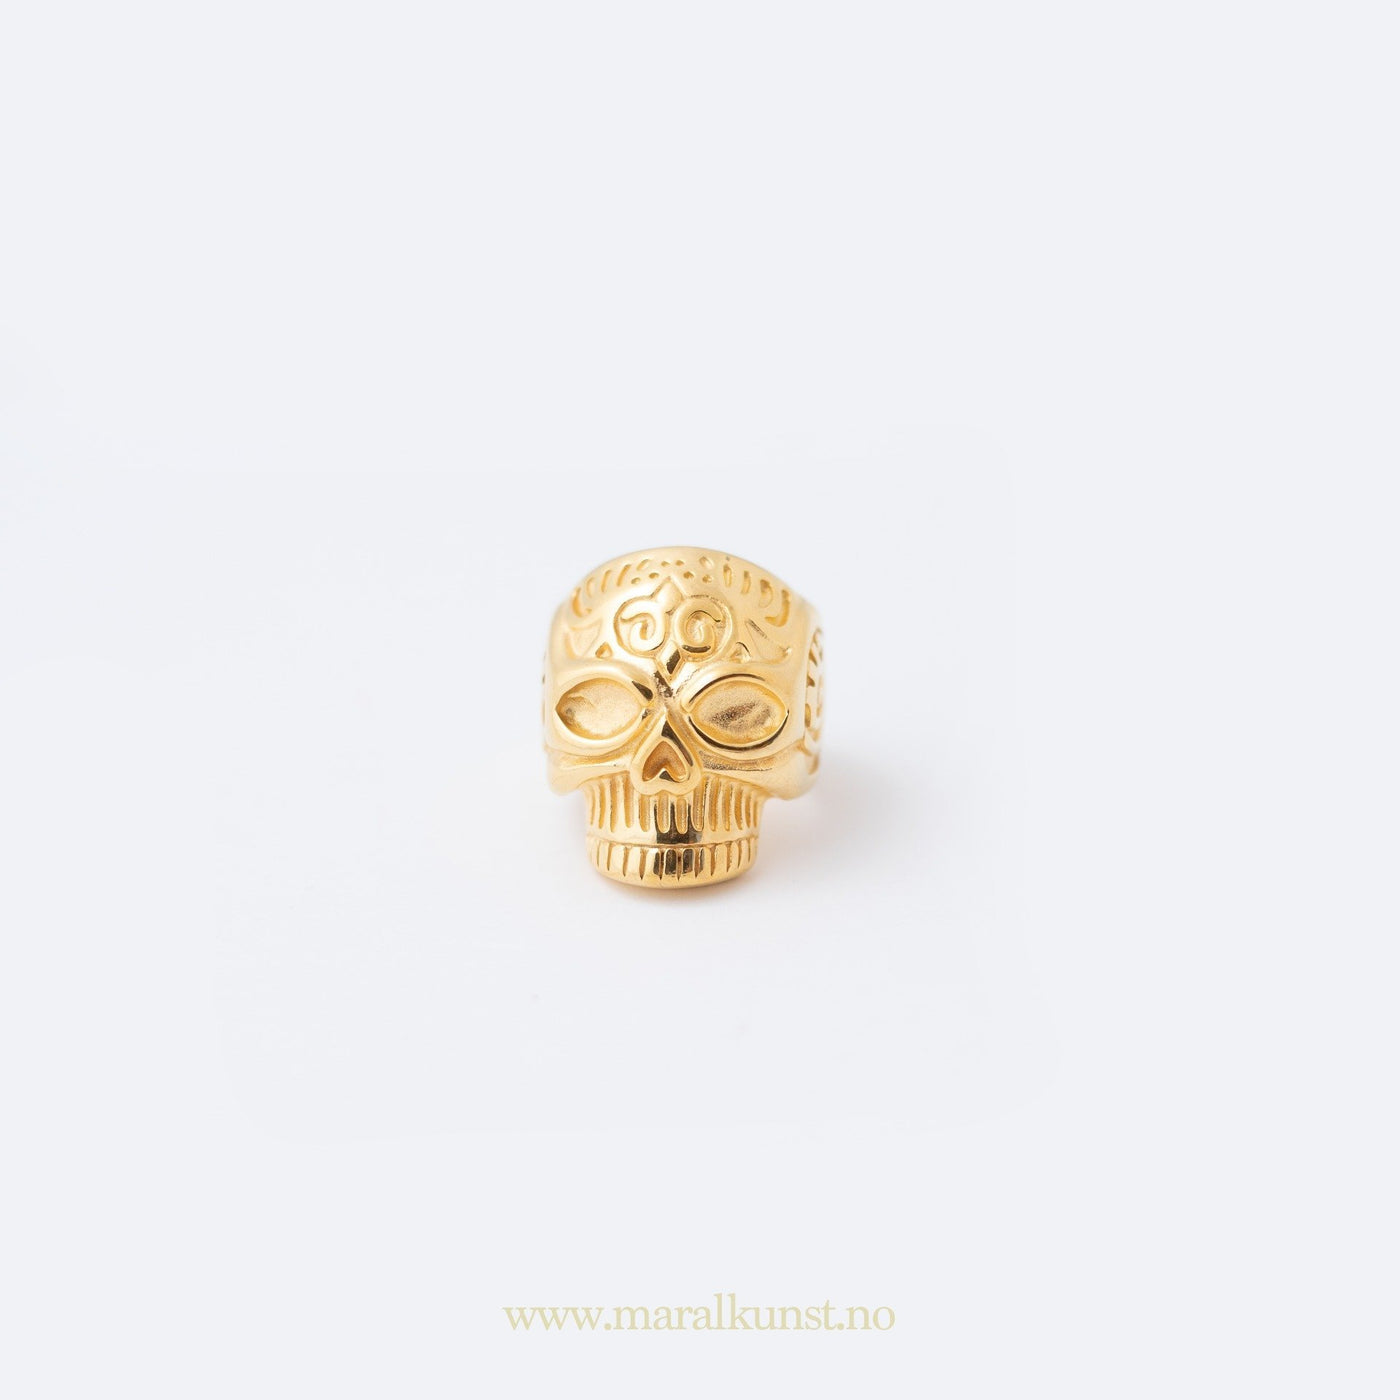 Gothic Skull Ring - Maral Kunst Jewelry